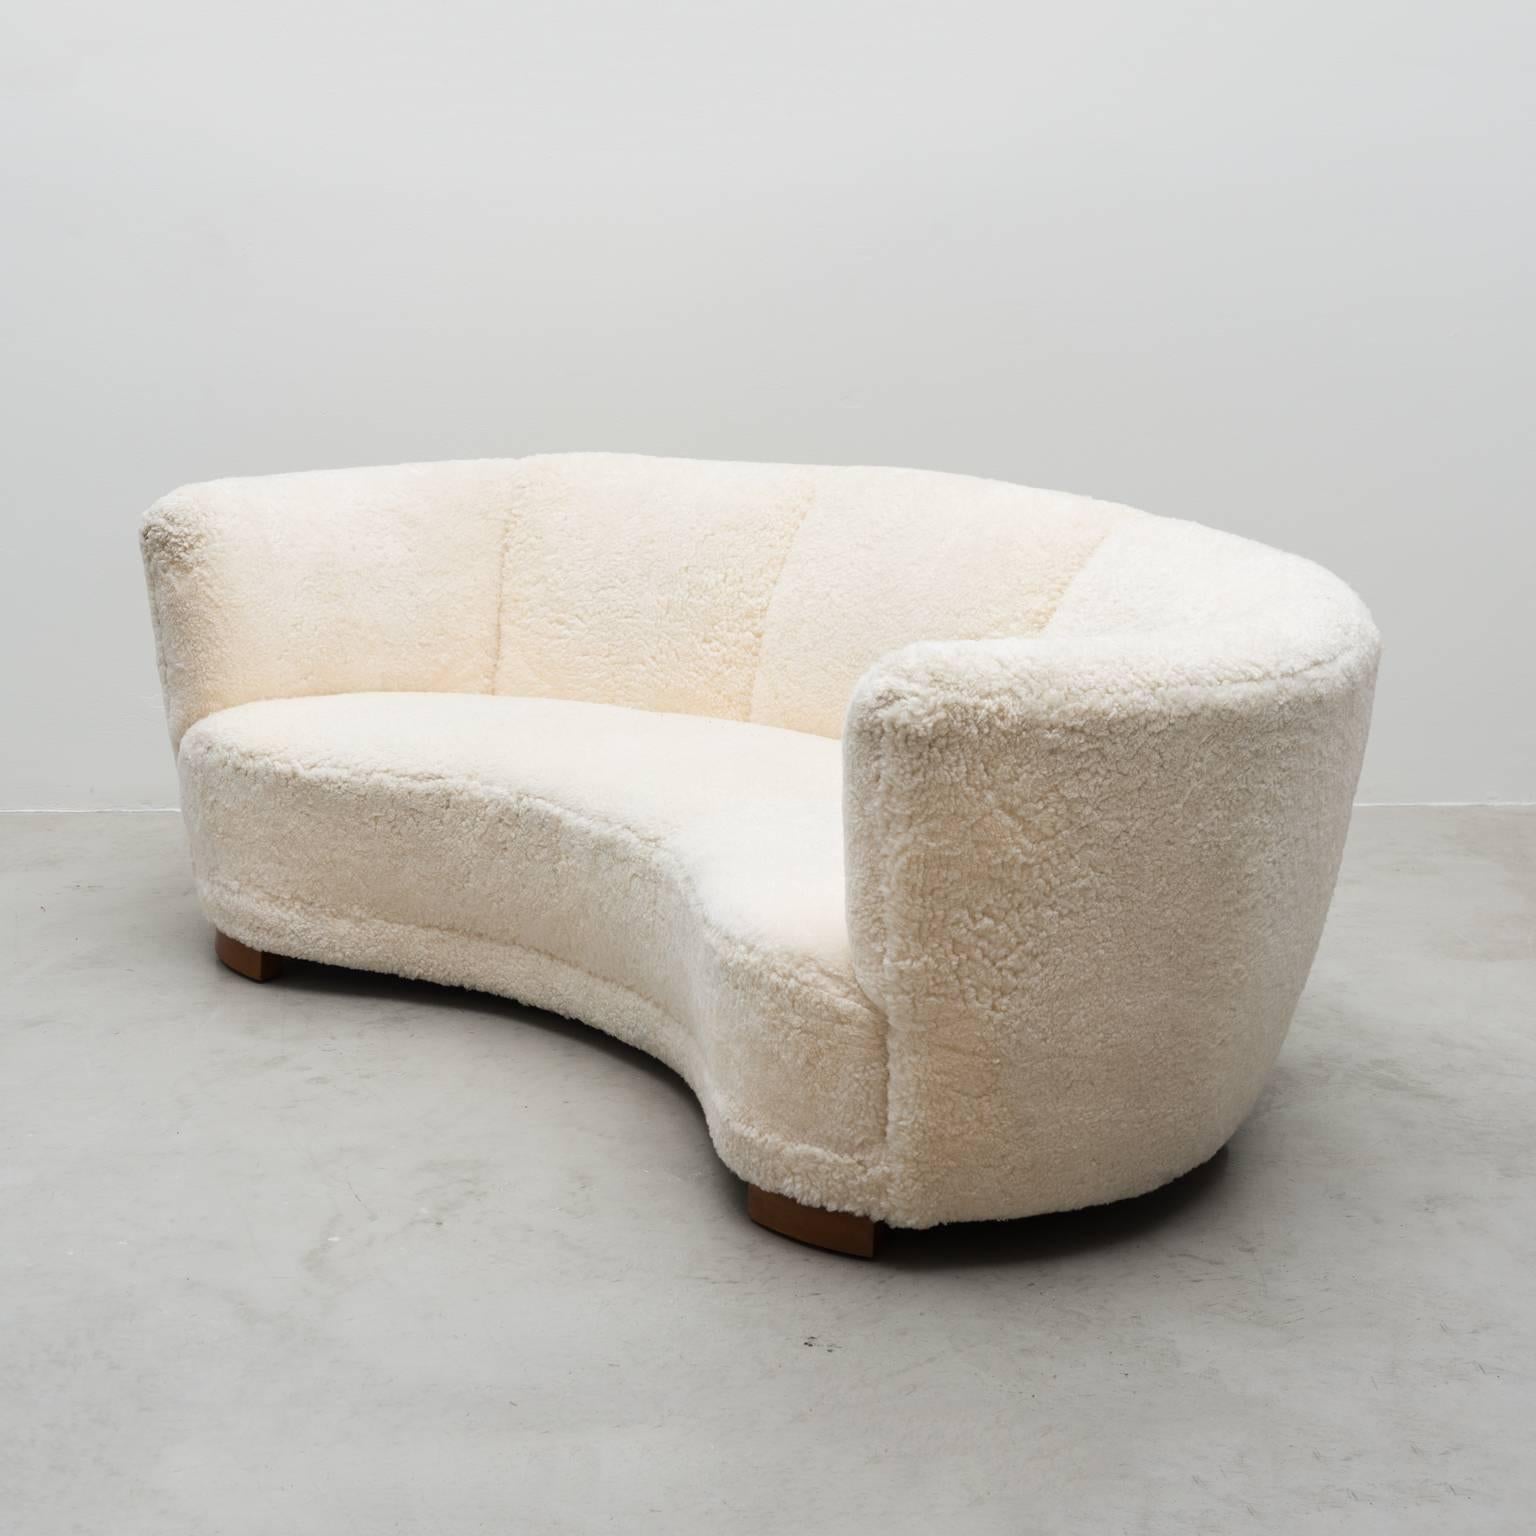 A Danish cabinetmaker's graceful curved three-seat sofa with beech legs, reupholstered in short white sheepskin, 1930s.